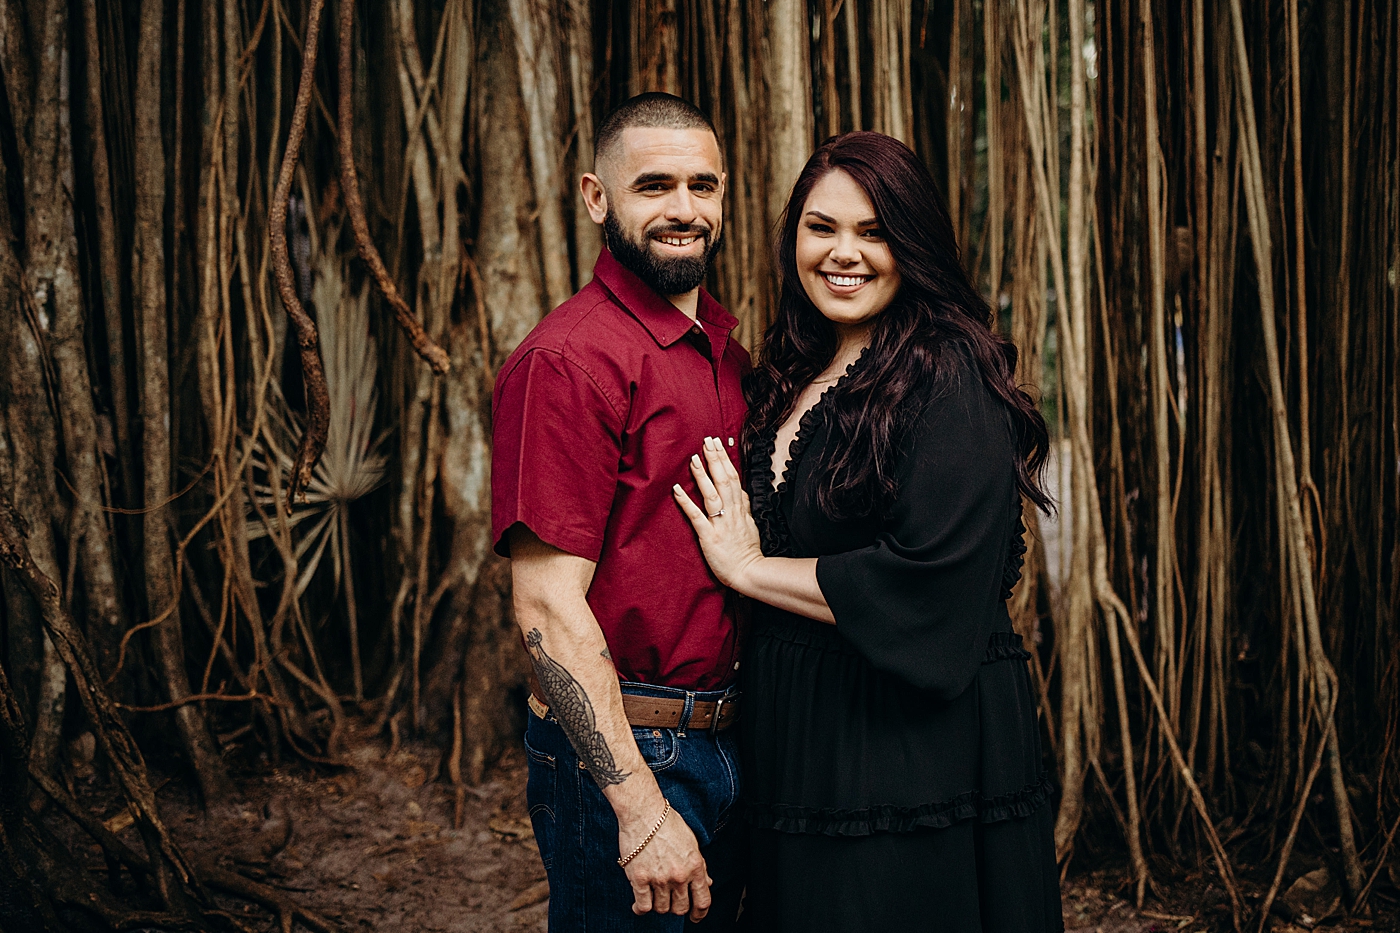 Couple holding each other with banyan tree behind them Tree Top Park Engagement Photography captured by Maggie Alvarez Photography